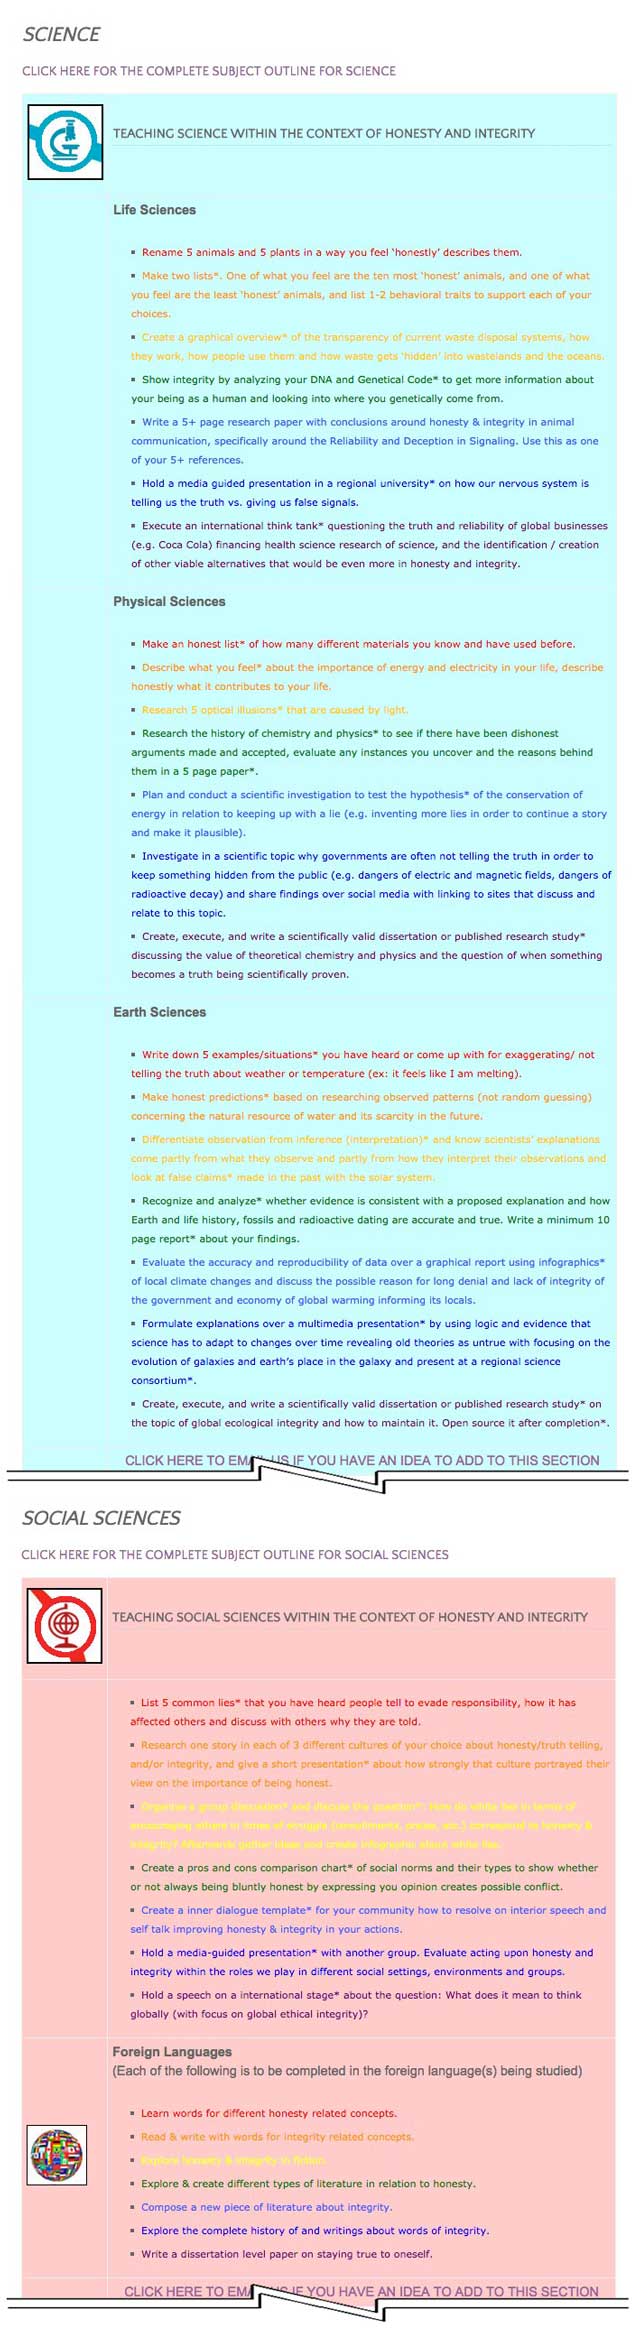 This last week the core team transferred the third 25% of the written content for the Honesty and Integrity Lesson Plan to the website, as you see here. This lesson plan purposed to teach all subjects, to all learning levels, in any learning environment, using the central theme of “Honesty & Integrity” is now 75% completed on our website.